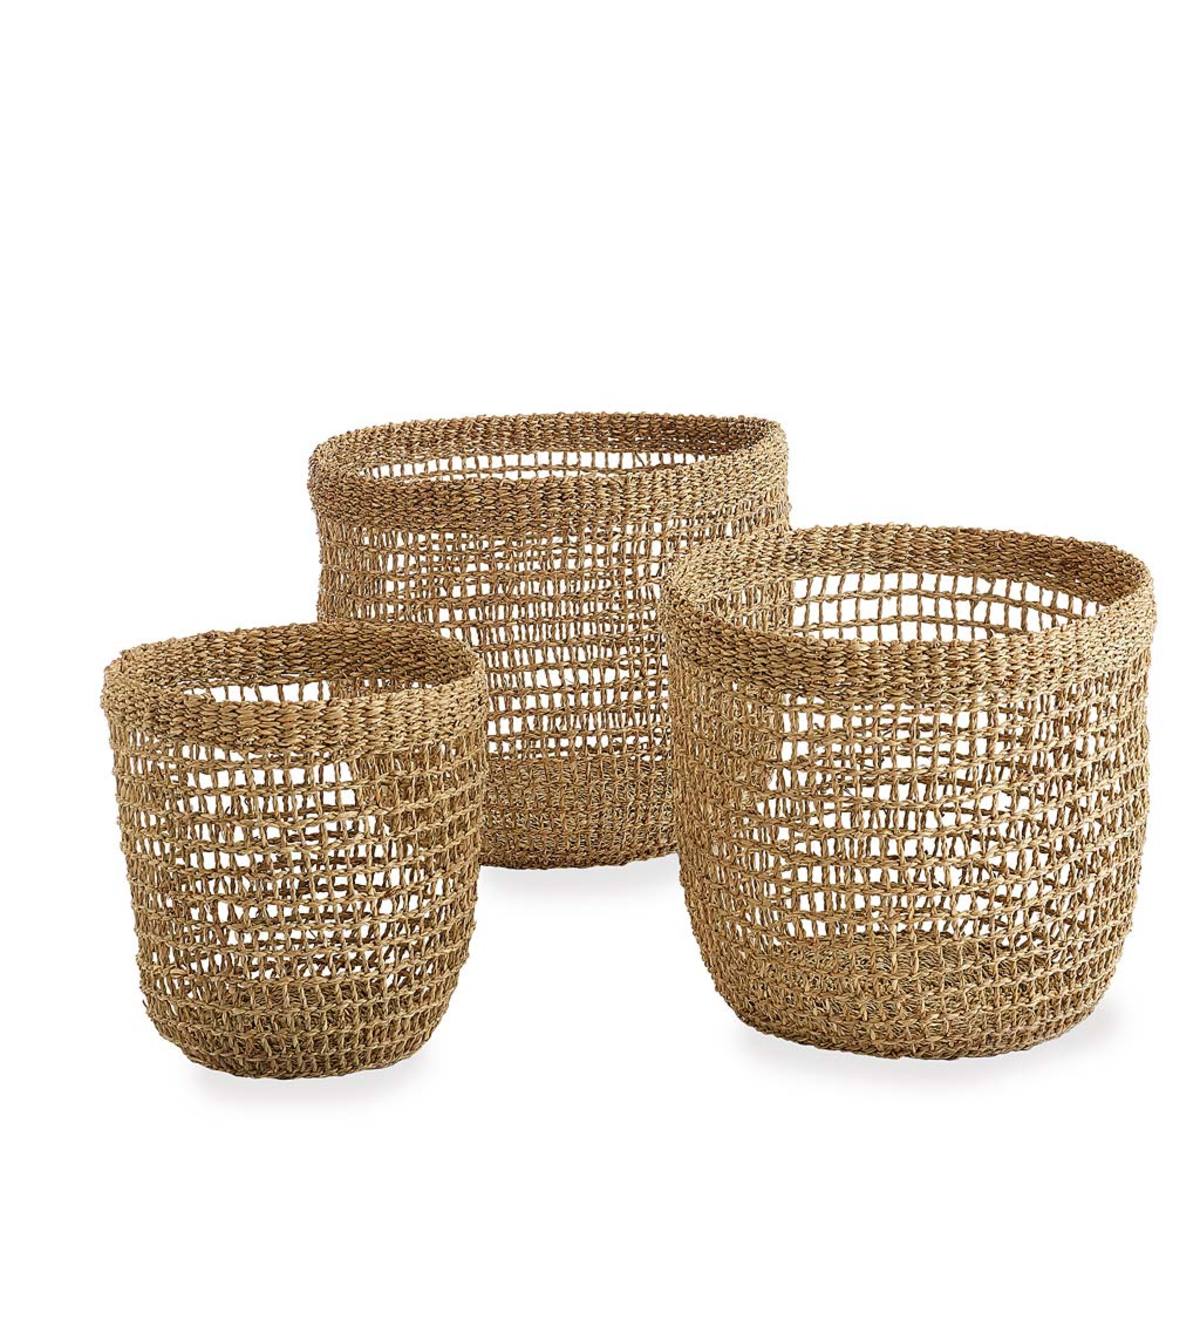 Woven Seagrass Baskets, Set of 3 | Wind and Weather